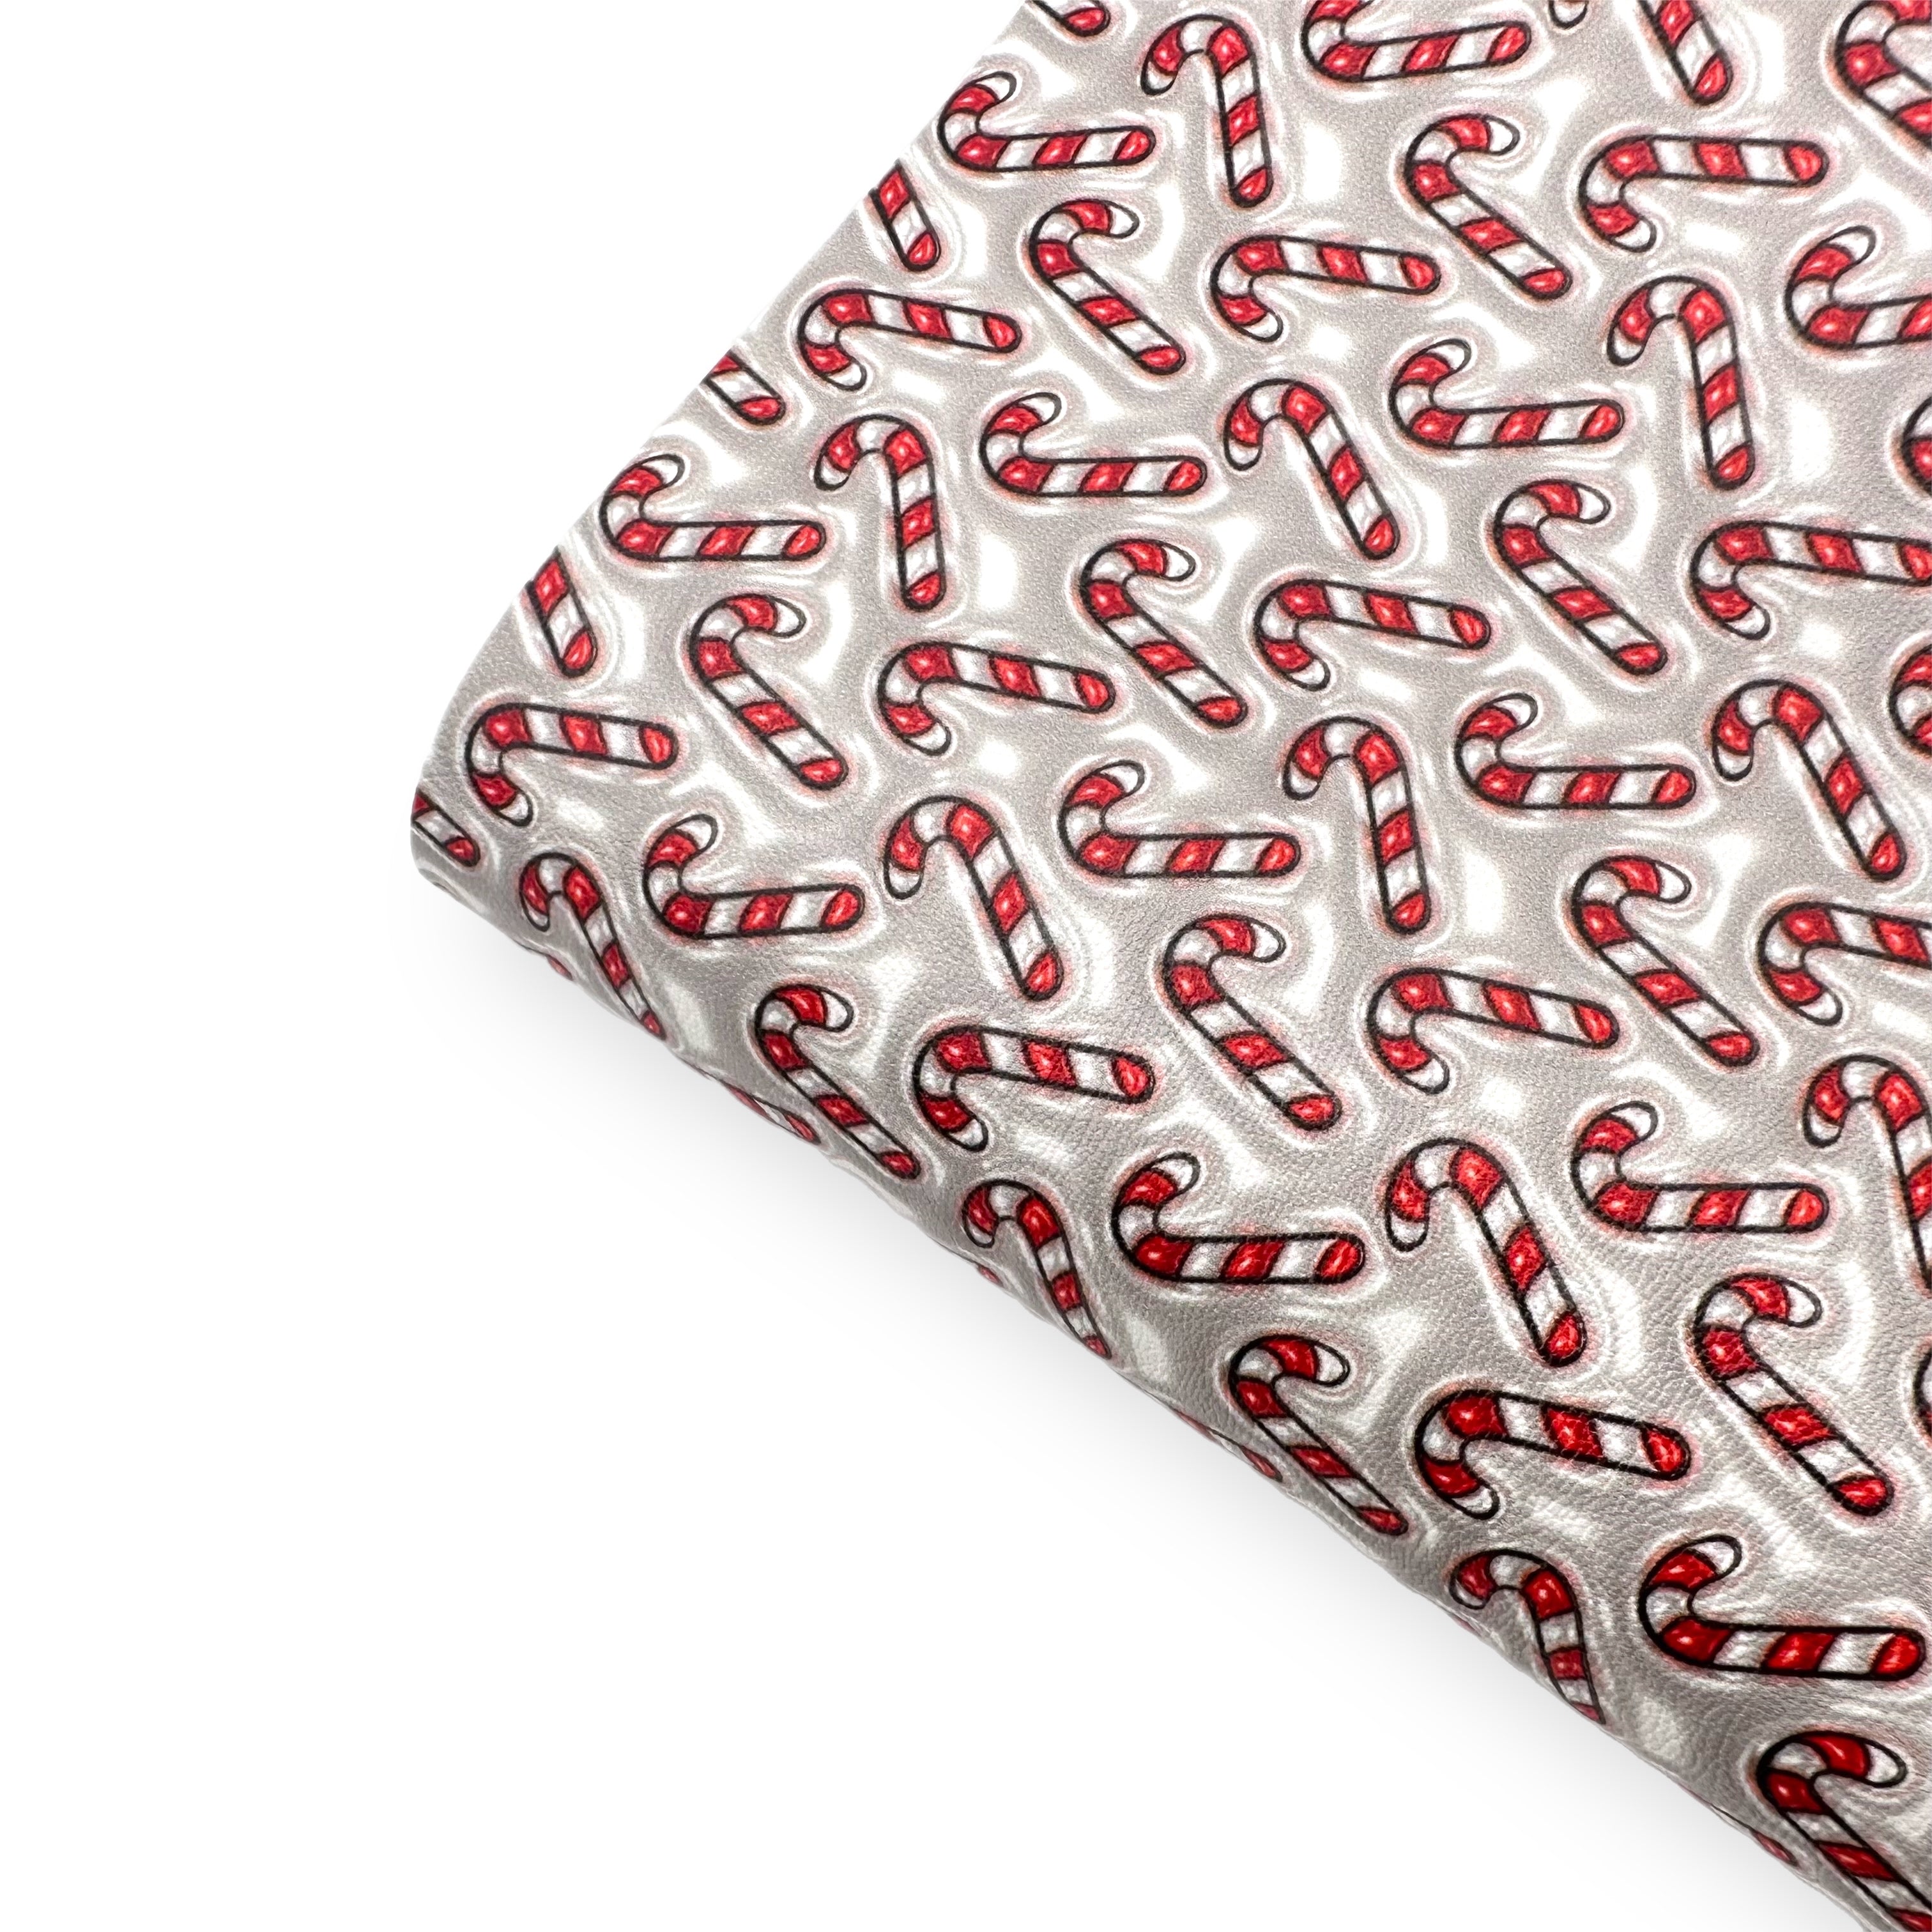 Puffy Candy Canes Premium Faux Leather Fabric Sheets